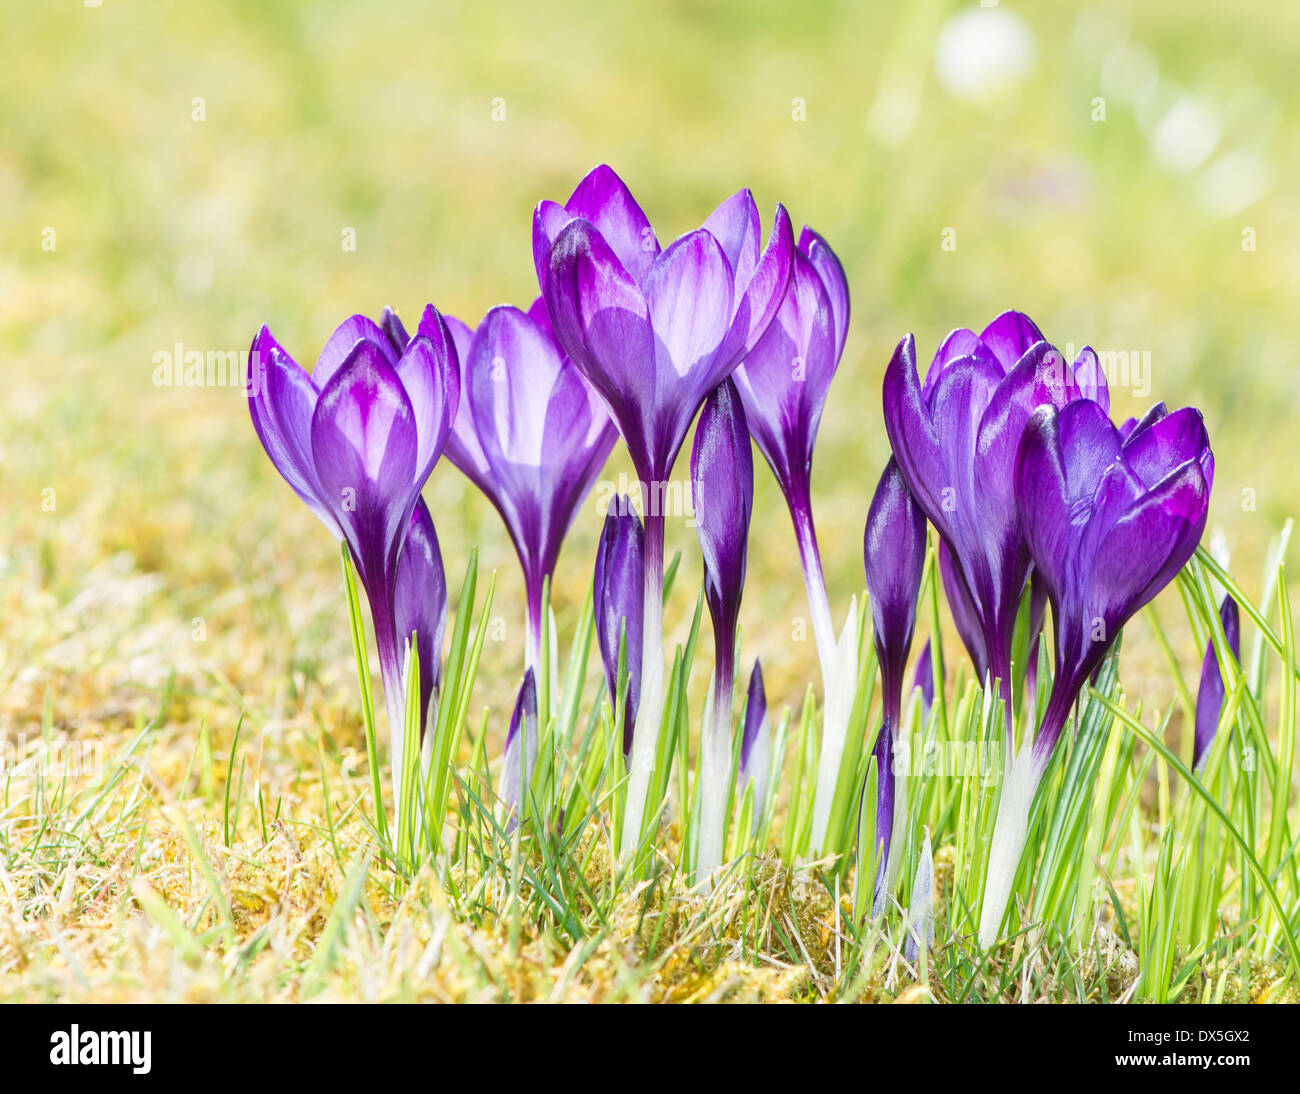 A group of purple crocus flowers in the grass Stock Photo